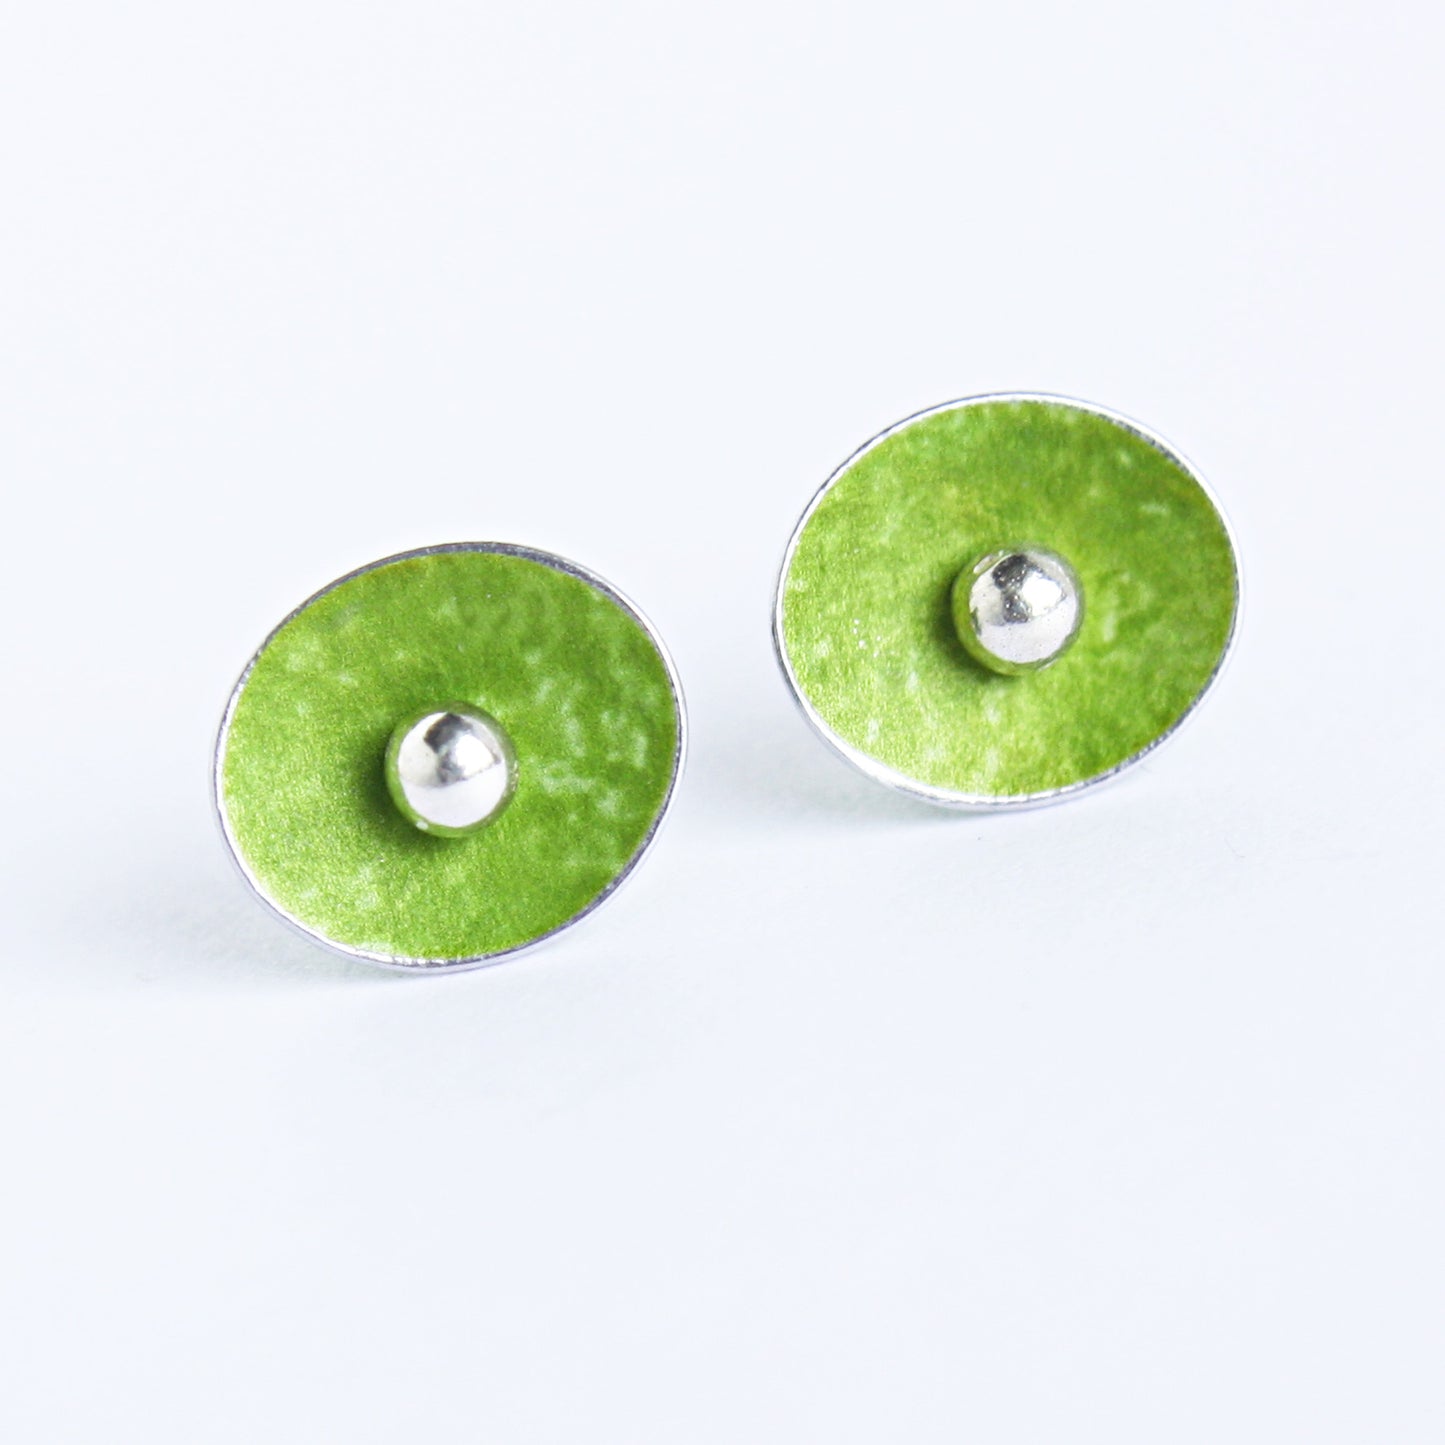 ES1 Small concave oval stud earrings